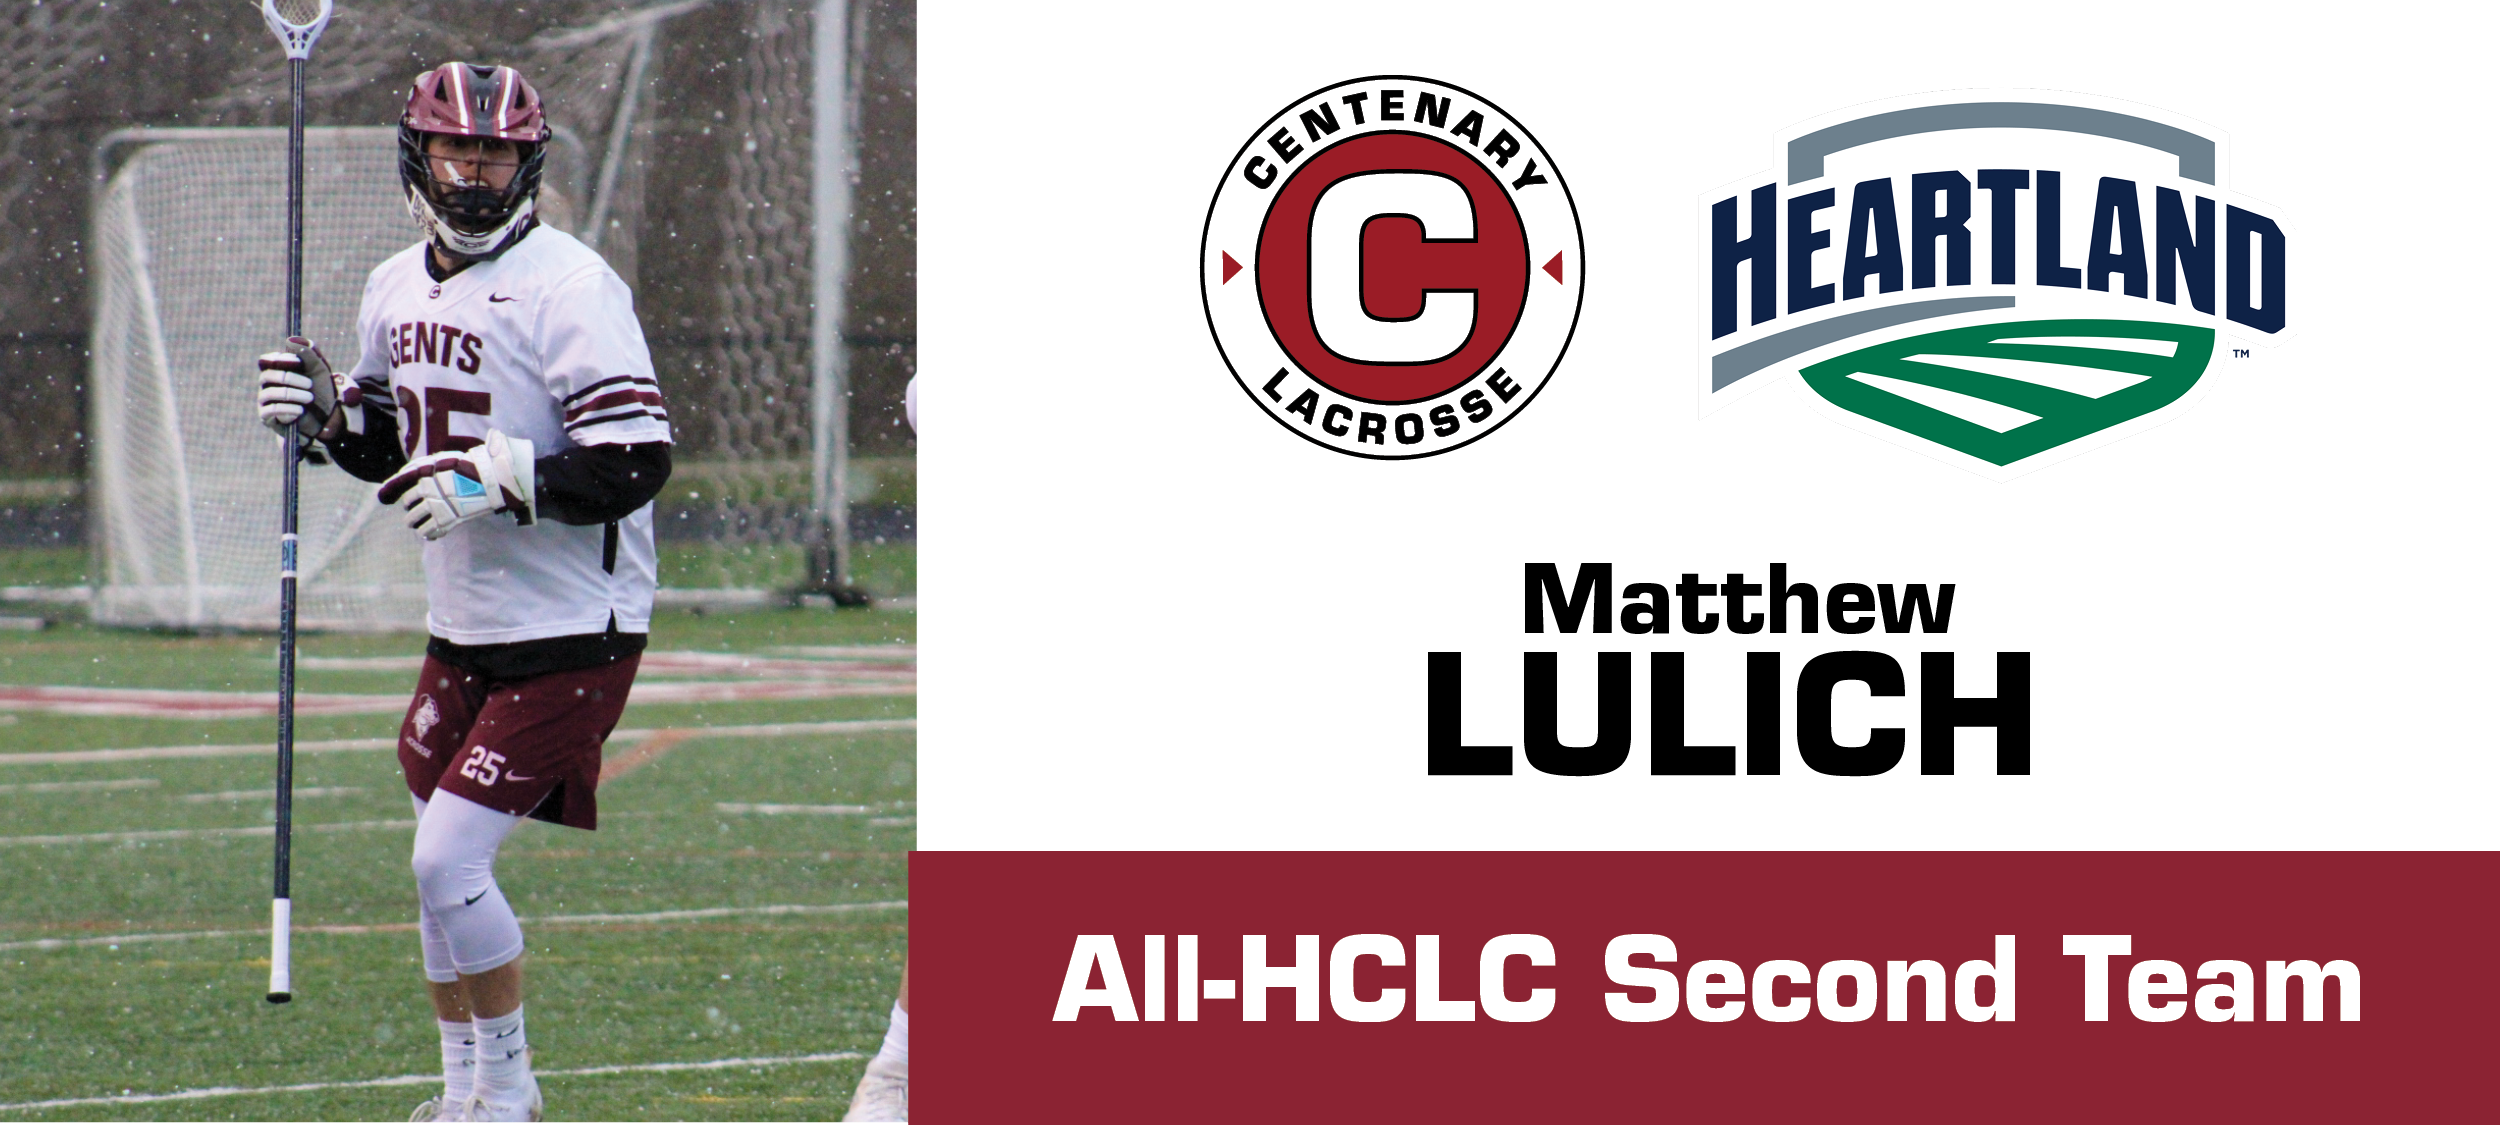 Matthew Lulich earned All-HCLC honors on Wednesday.